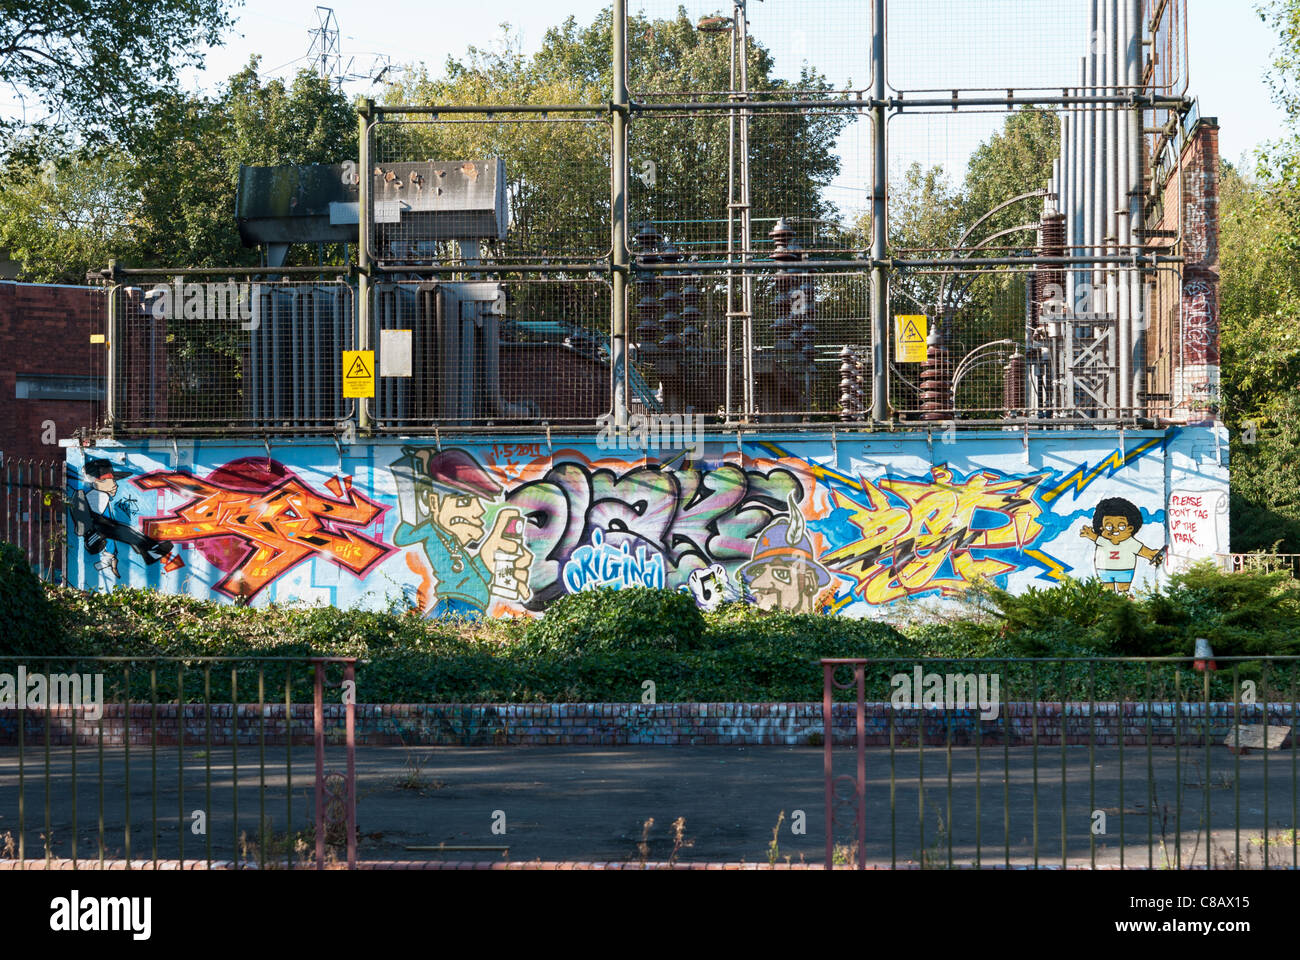 electricity sub-station with graffiti on the wall in bournbrook recreation ground, selly oak, birmingham Stock Photo